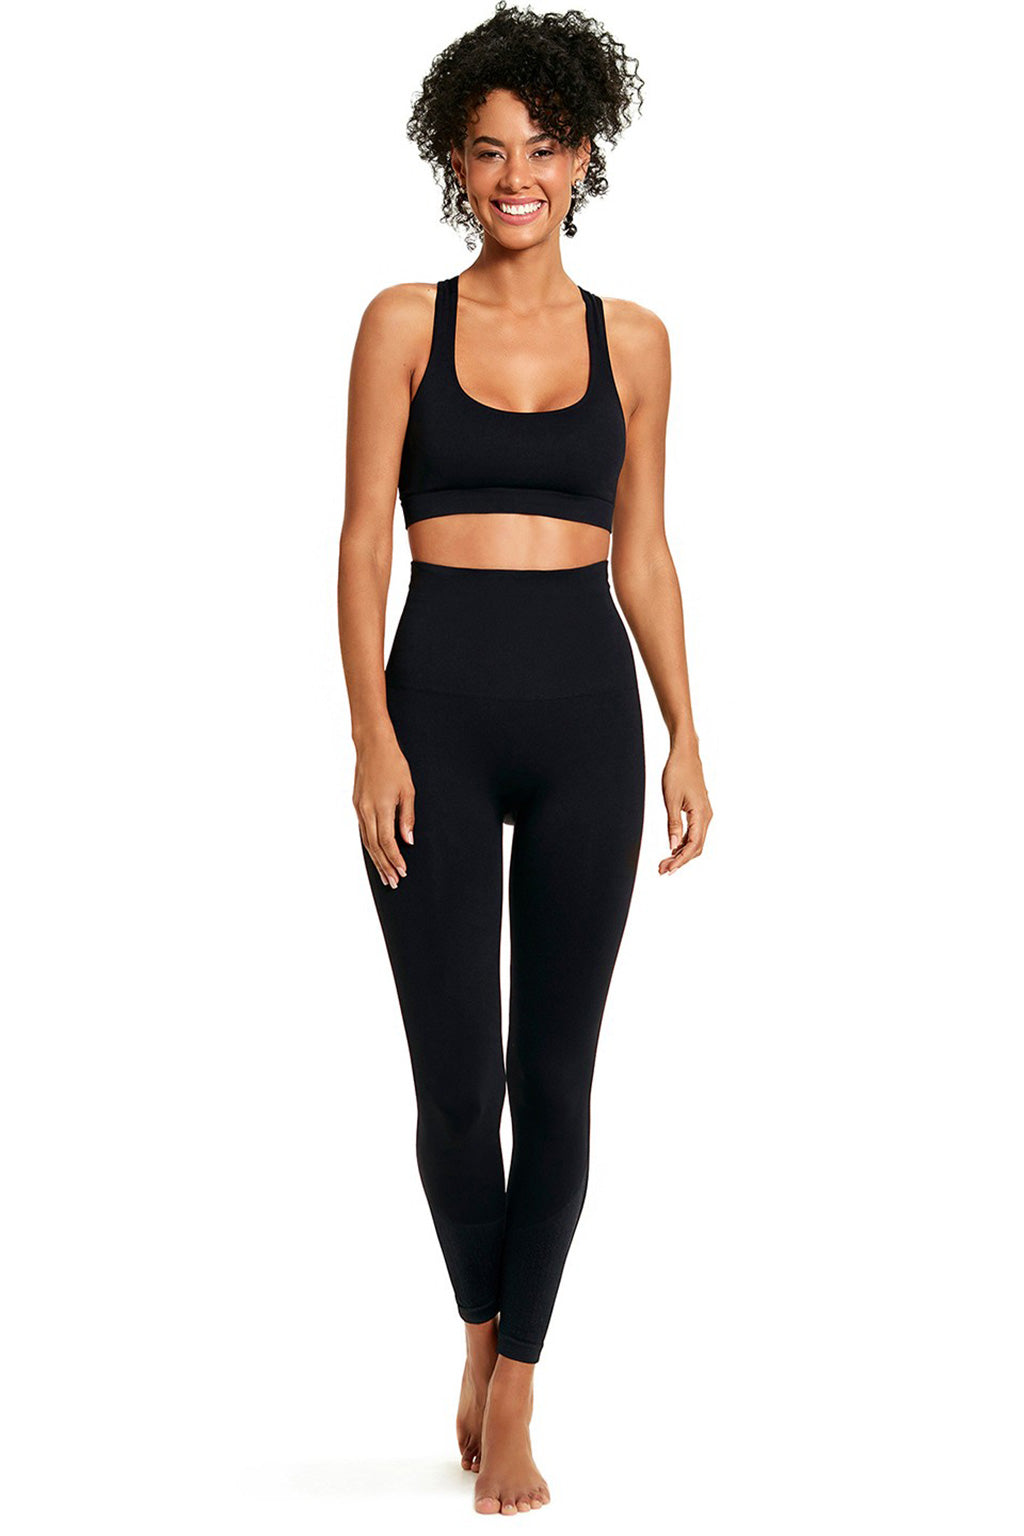 BASIC Fusion style Sport Legging with double and versatile waistband -  METRO BRAZIL